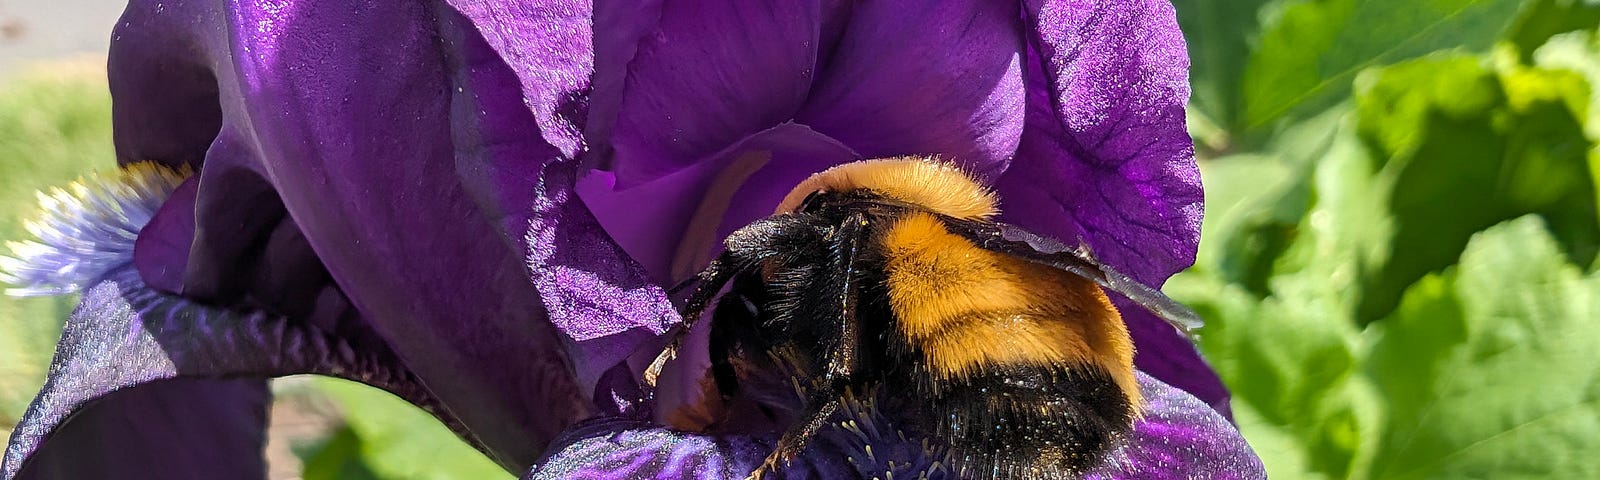 A bumblebee is nestled deep inside a vibrant purple flower, busily collecting pollen. The sunlight highlights the delicate petal texture and the bee’s fuzzy body.